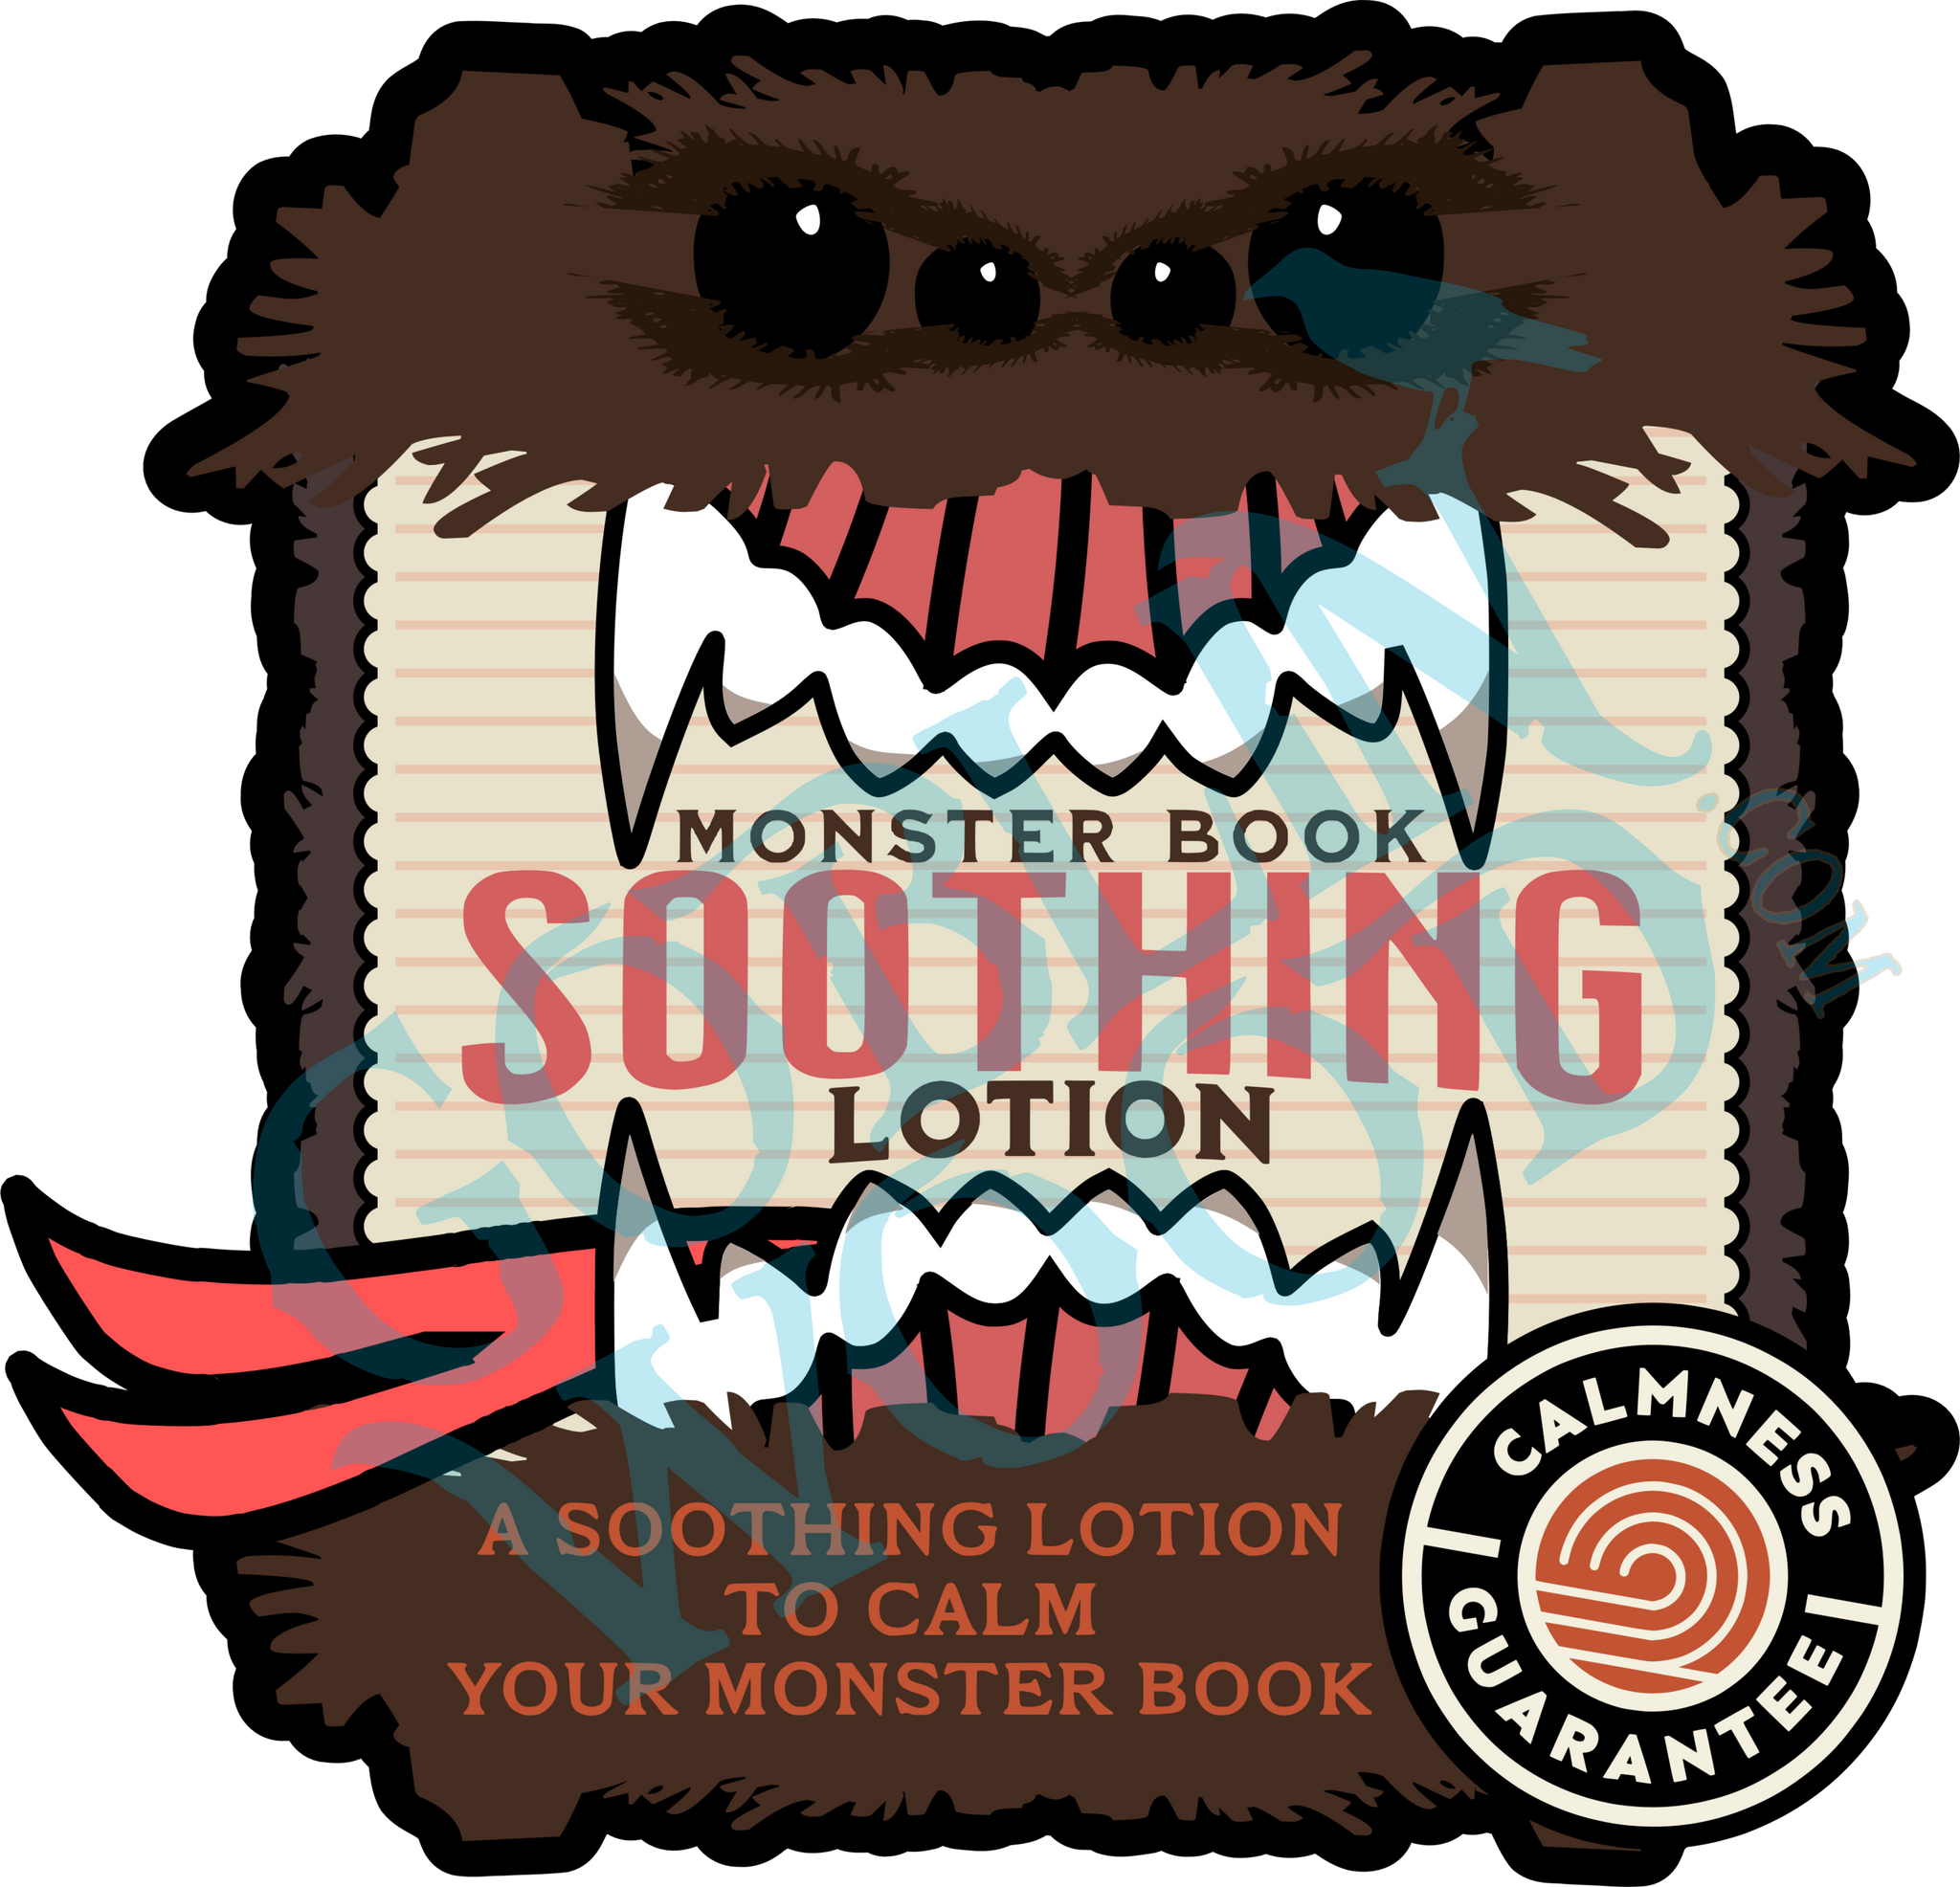 Monster Book Soothing Lotion - Harry Potter Inspired